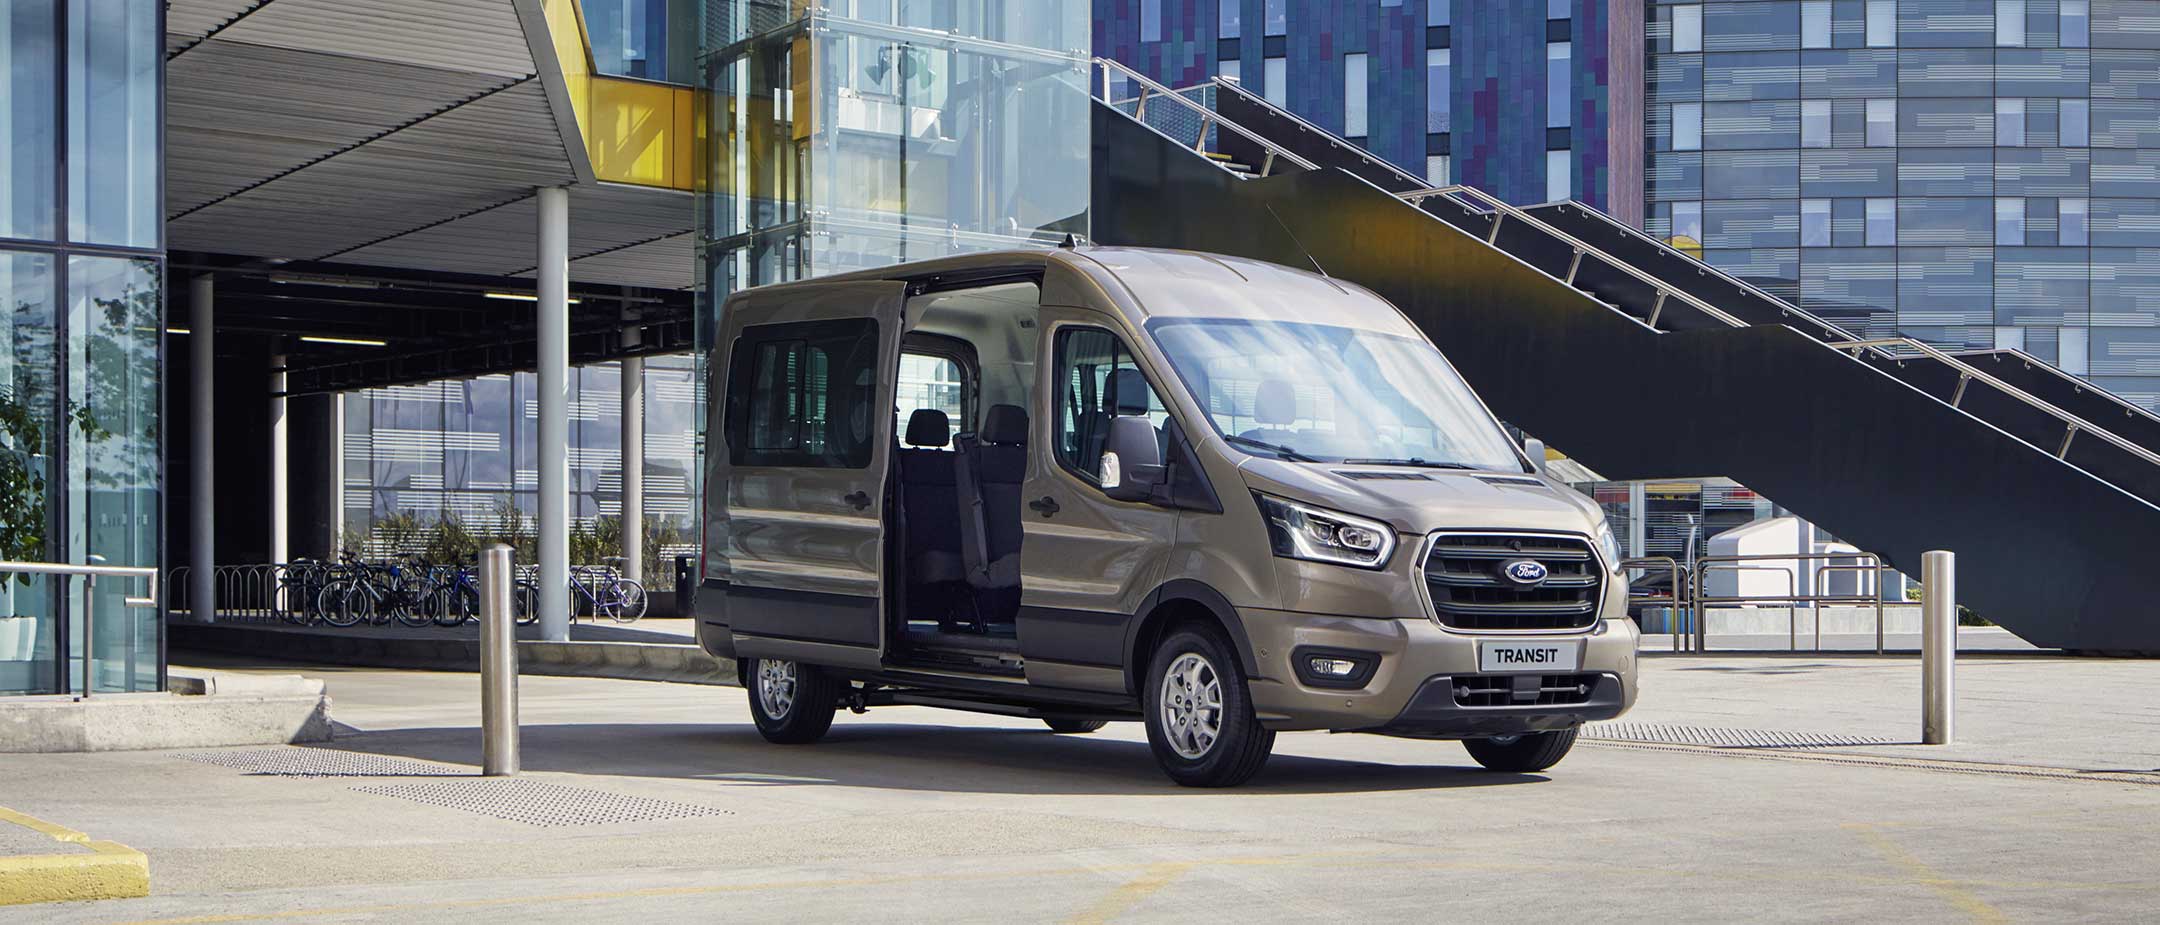 Ford Transit Minibus standing with side door open in front of modern building